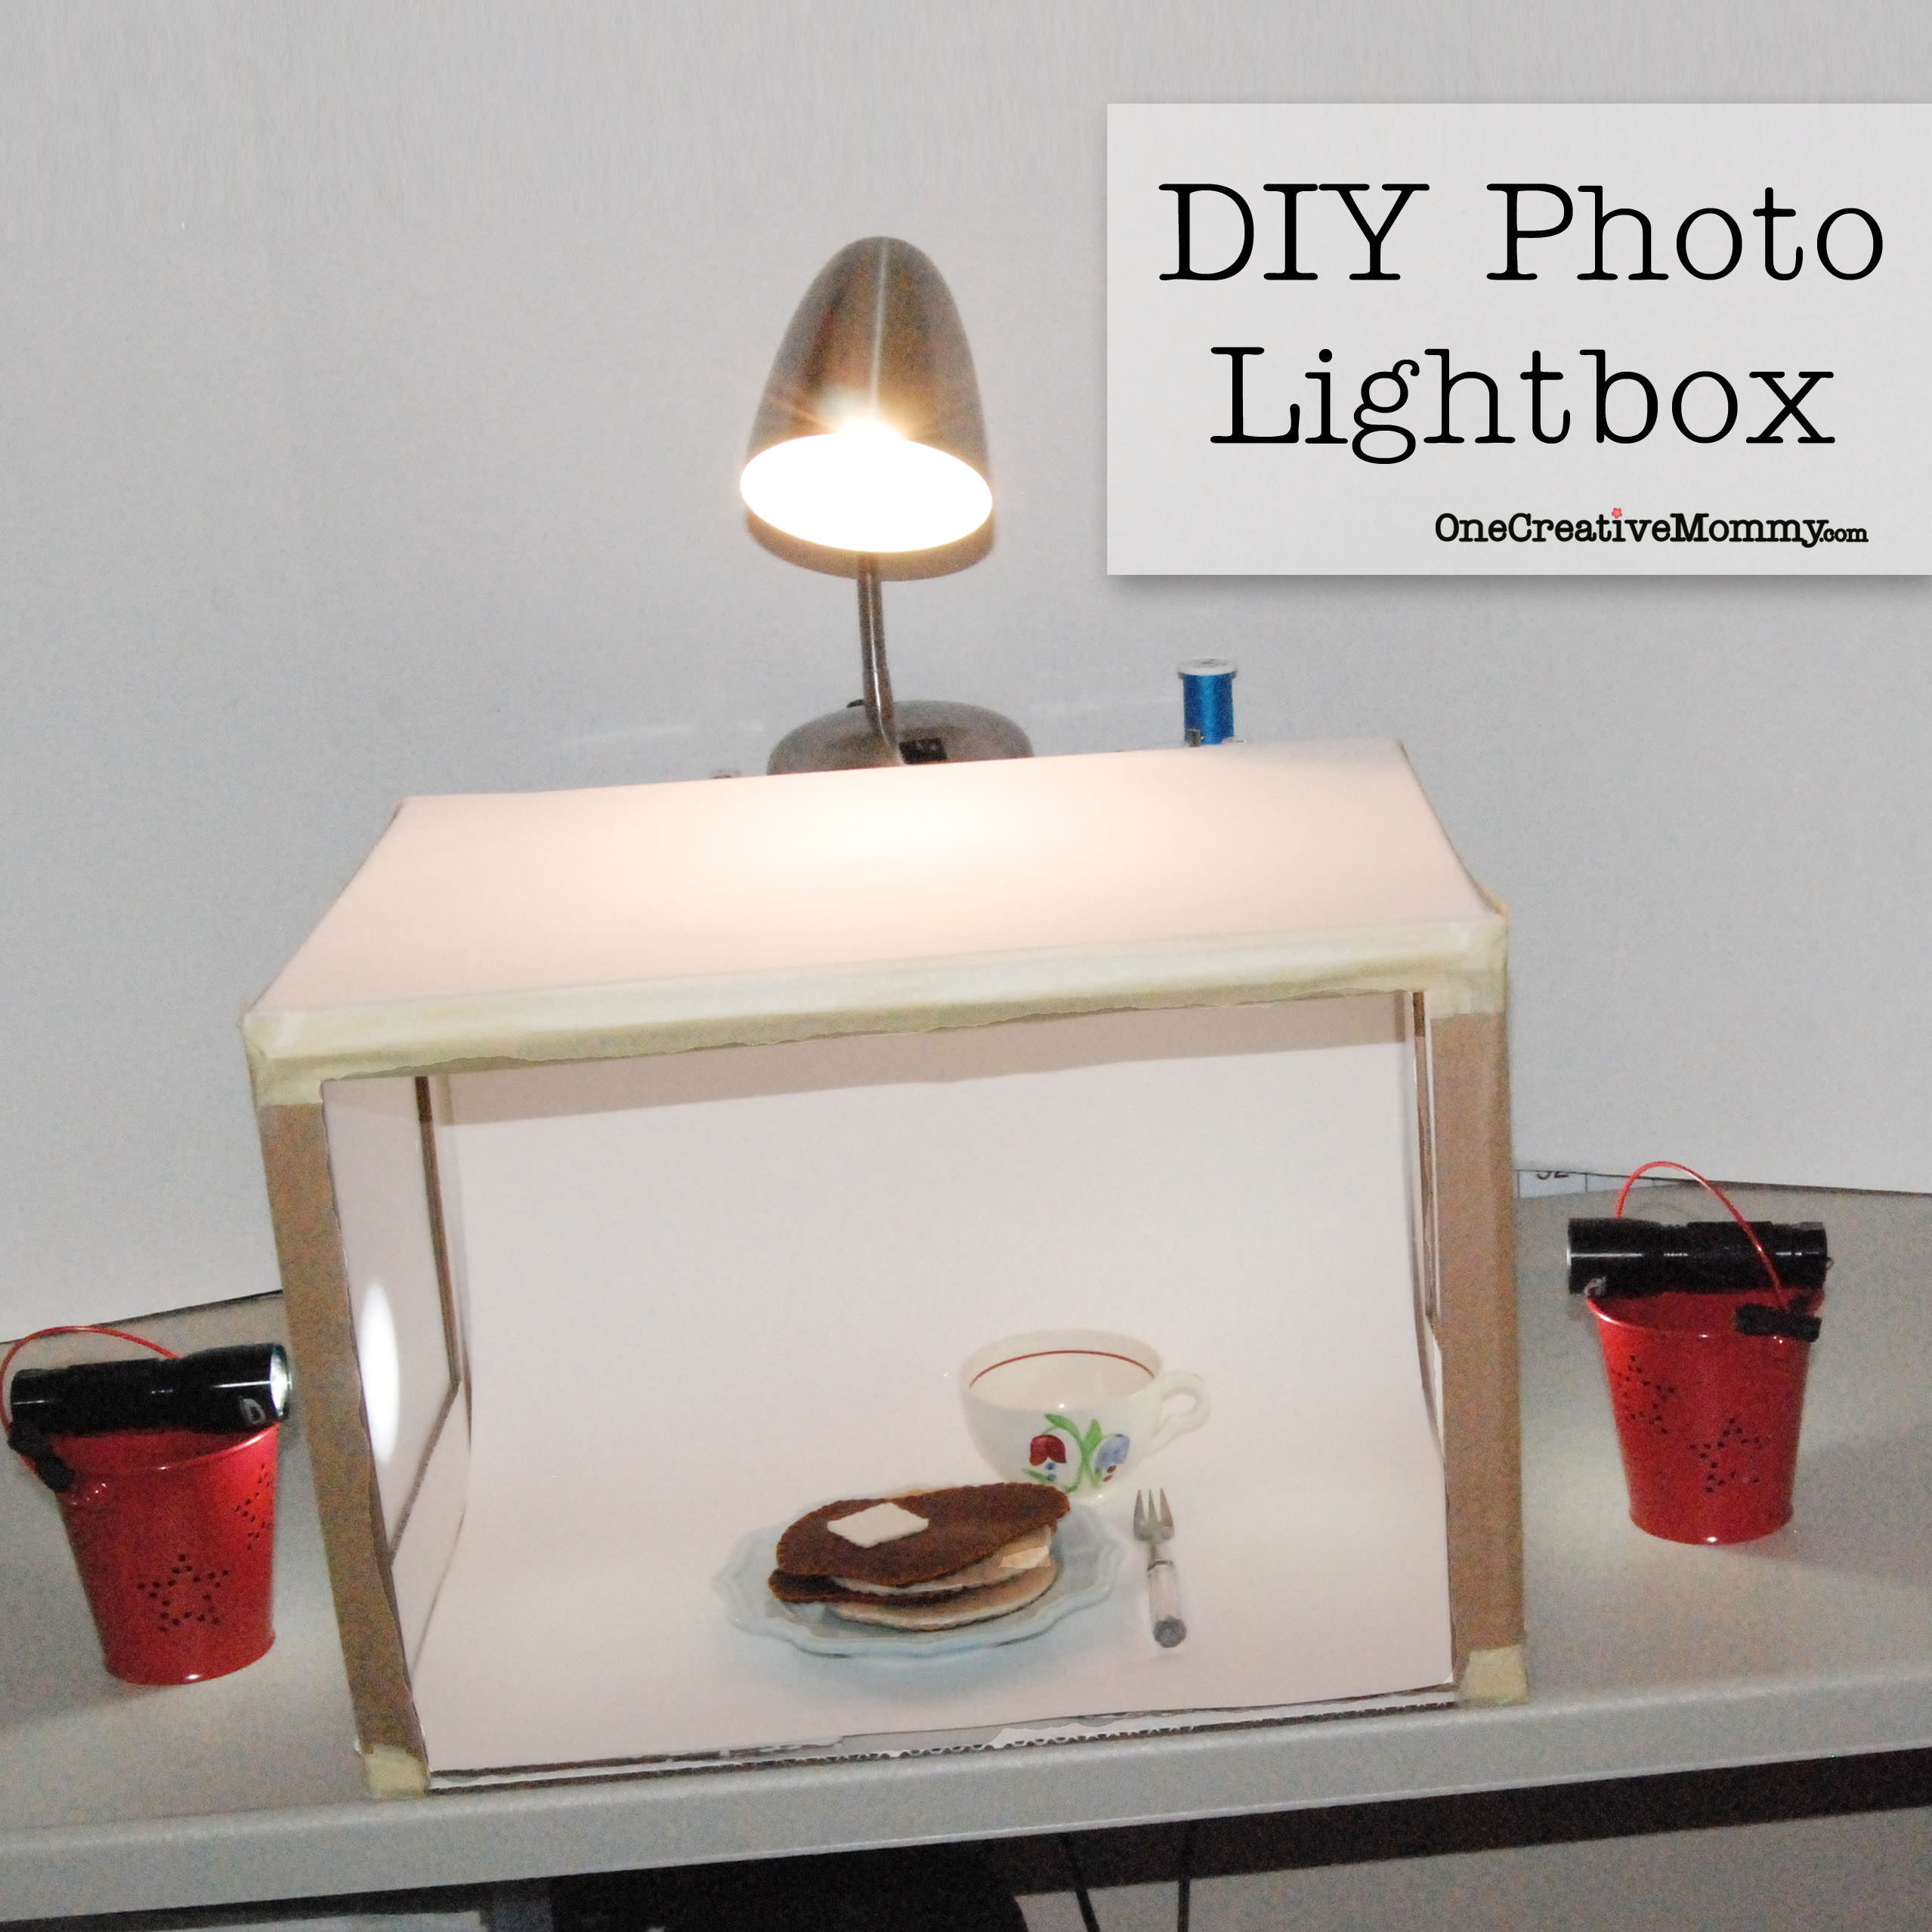 DIY Light Boxes For Photography
 Grow Your Blog Series DIY Lightbox onecreativemommy